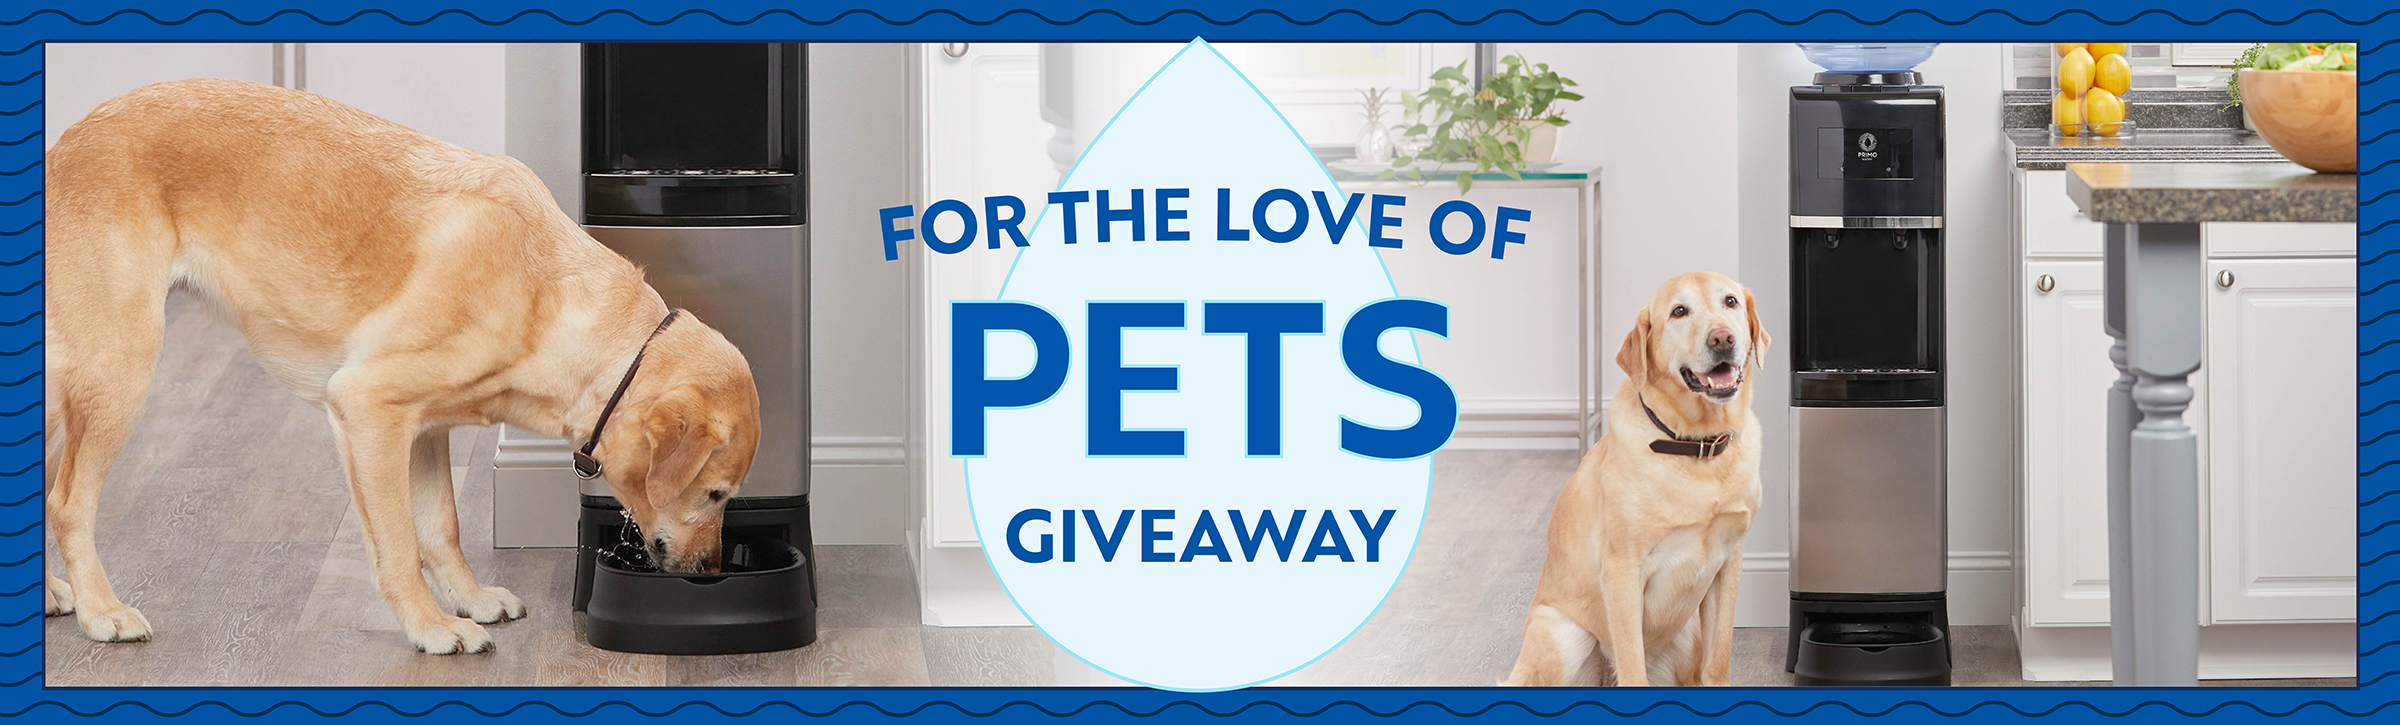 For the Love of Pets Giveaway